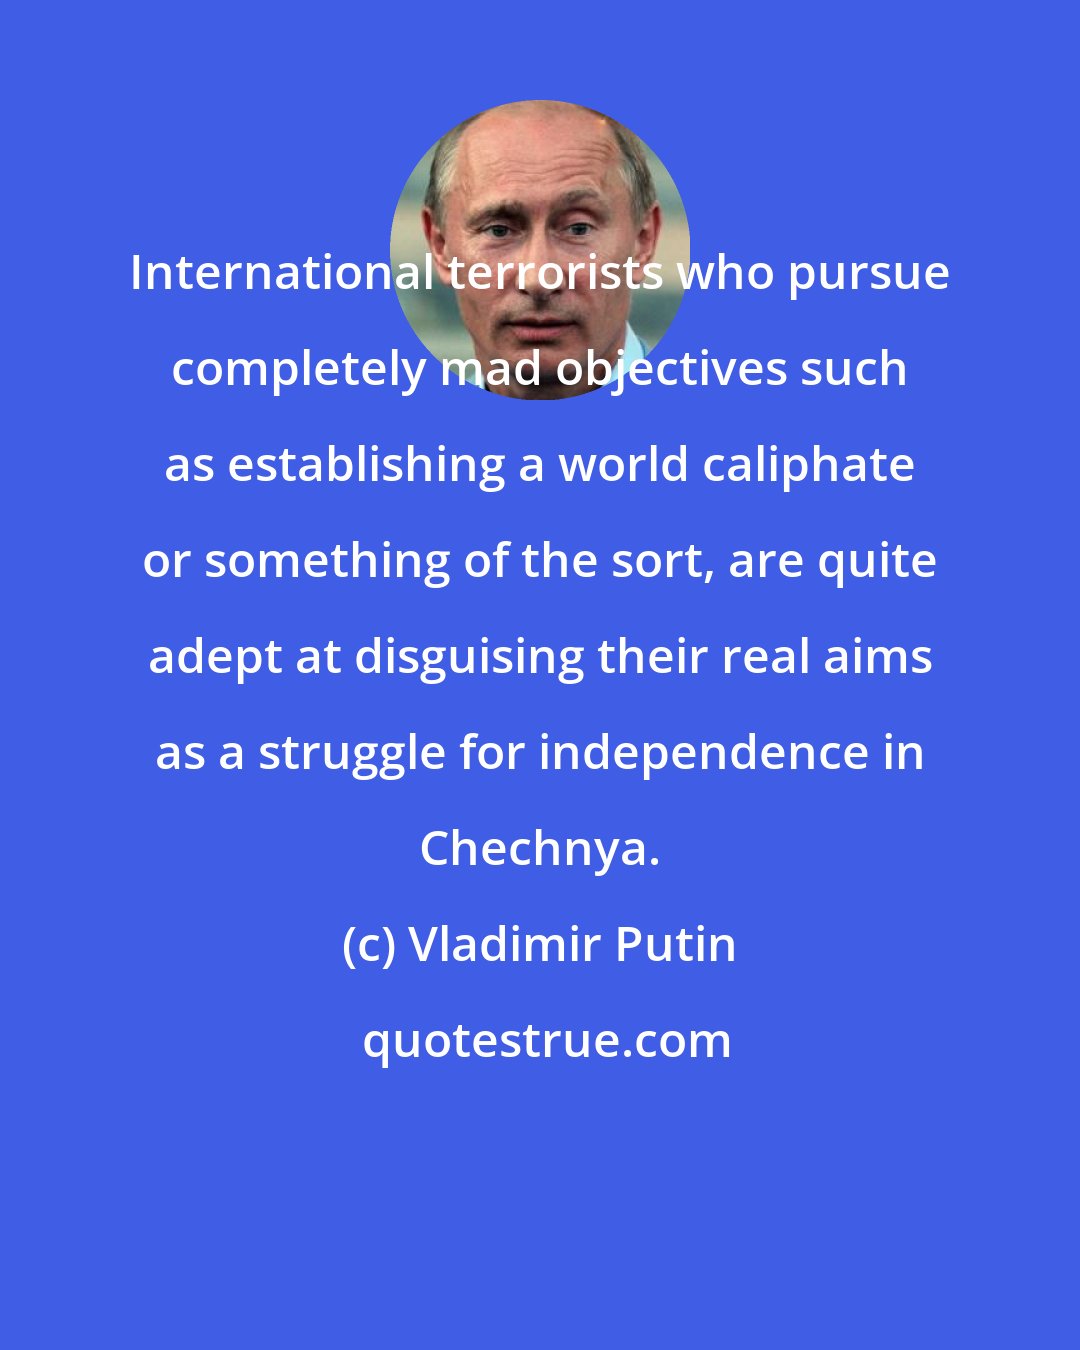 Vladimir Putin: International terrorists who pursue completely mad objectives such as establishing a world caliphate or something of the sort, are quite adept at disguising their real aims as a struggle for independence in Chechnya.